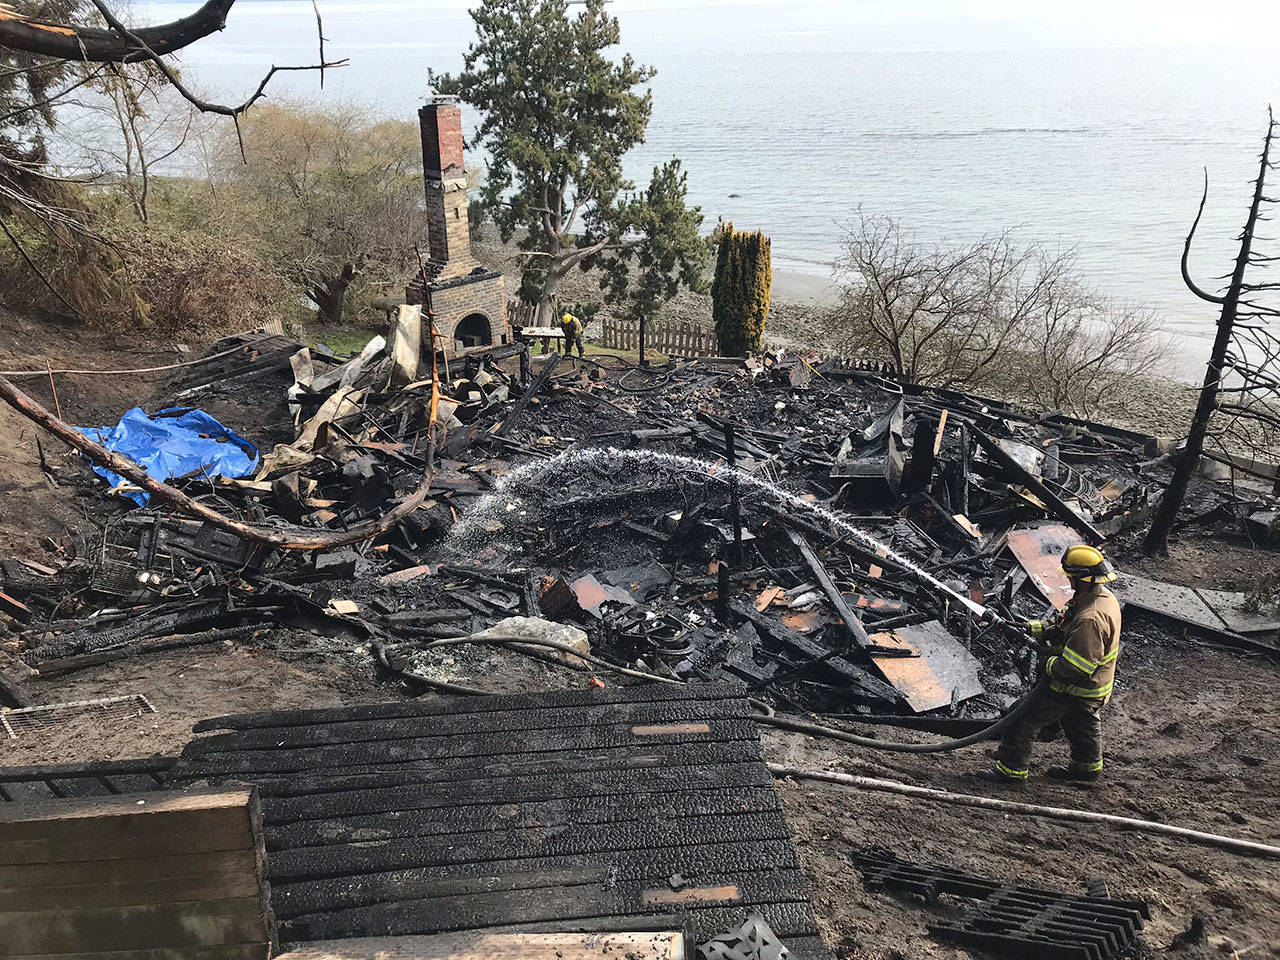 Lack of accessibility, nearby fire hydrant and late detection all contributed to a fire which completely engulfed a waterfront cabin in Kingston on March 30. Courtesy Michele Laboda, North Kitsap Fire & Rescue.